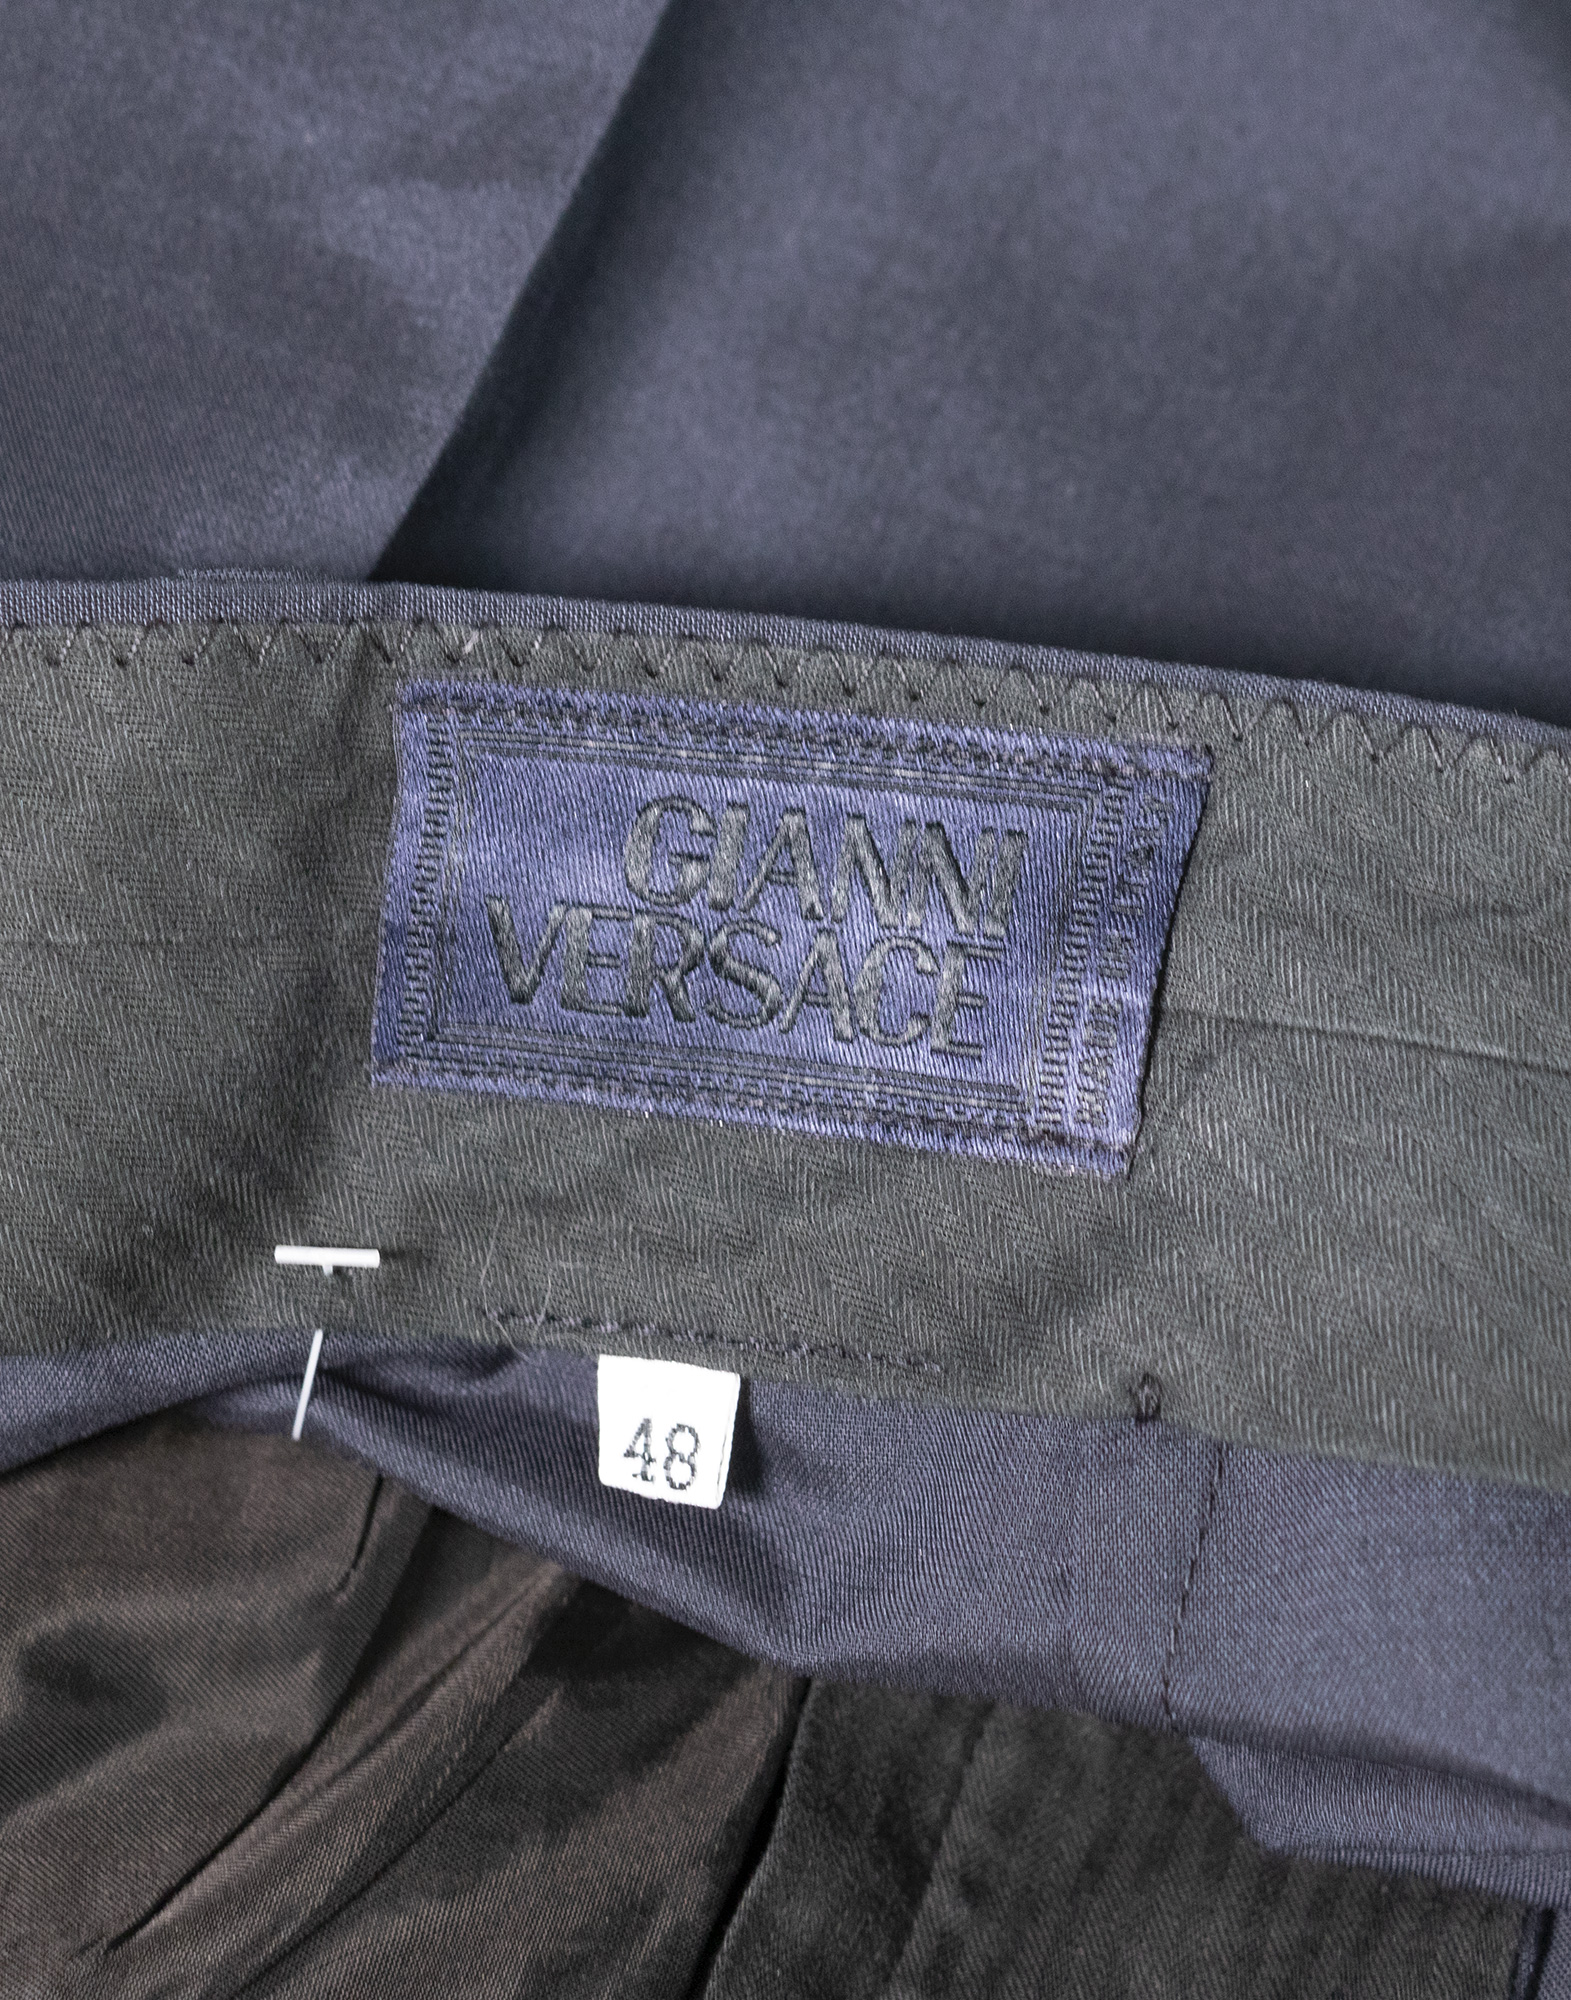 Gianni Versace - Vintage trousers with pleats